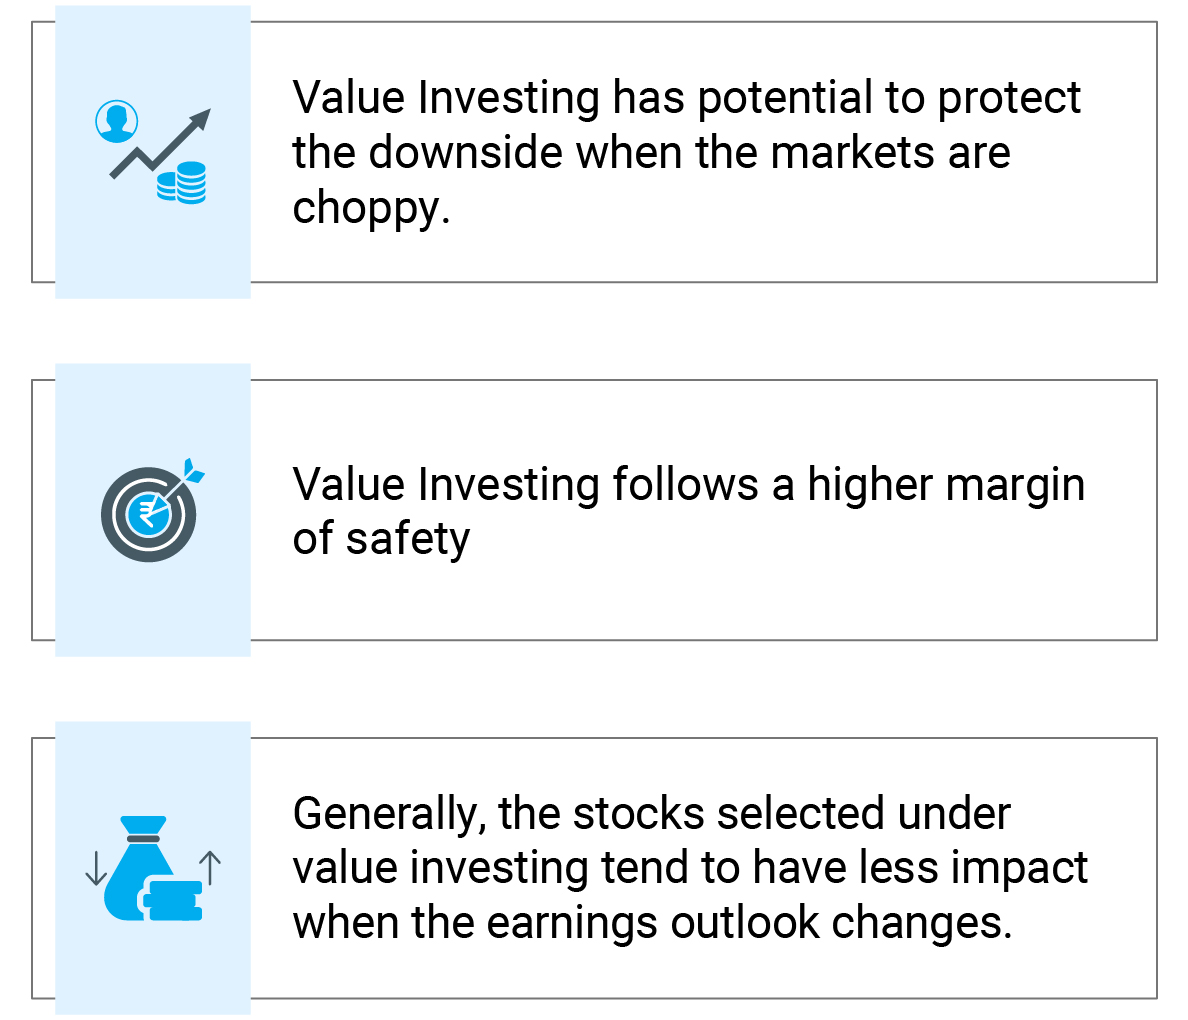 three features of value investing are